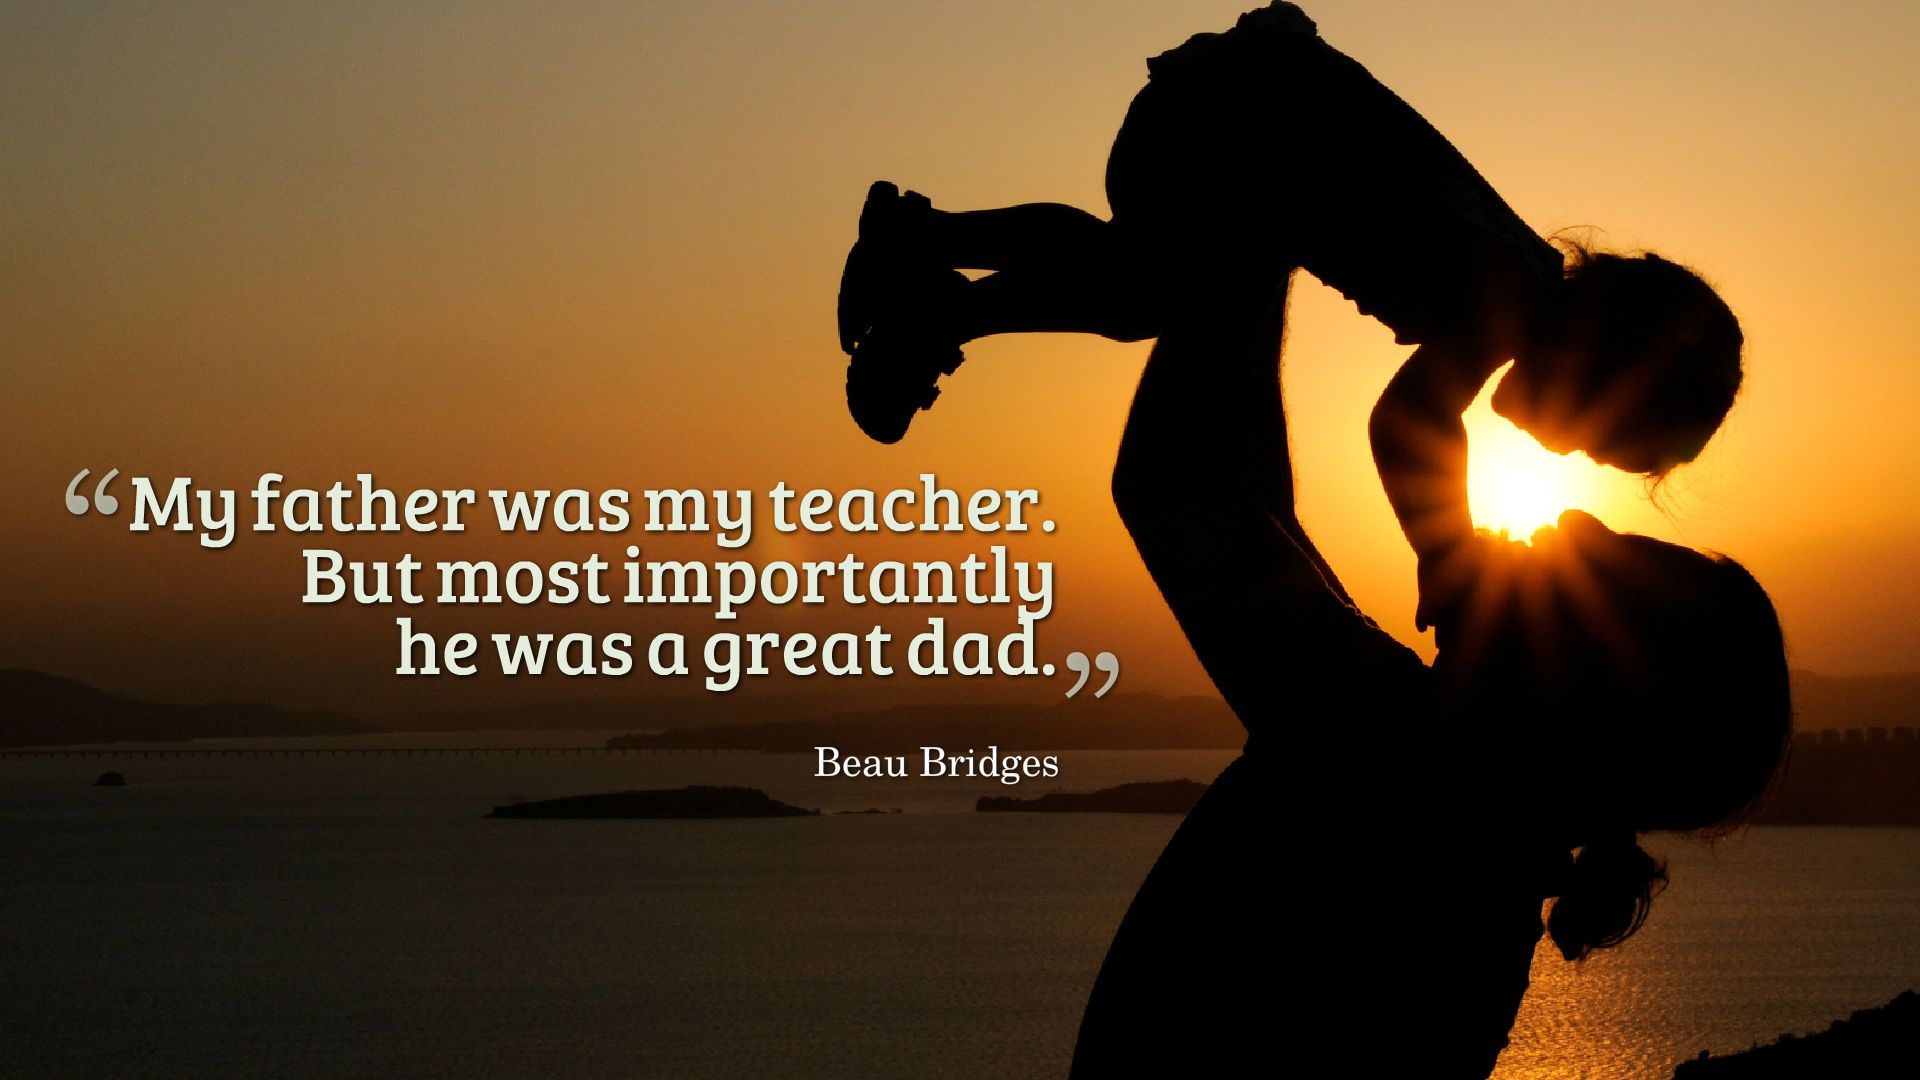 fathers day quotes from daughter wallpapers